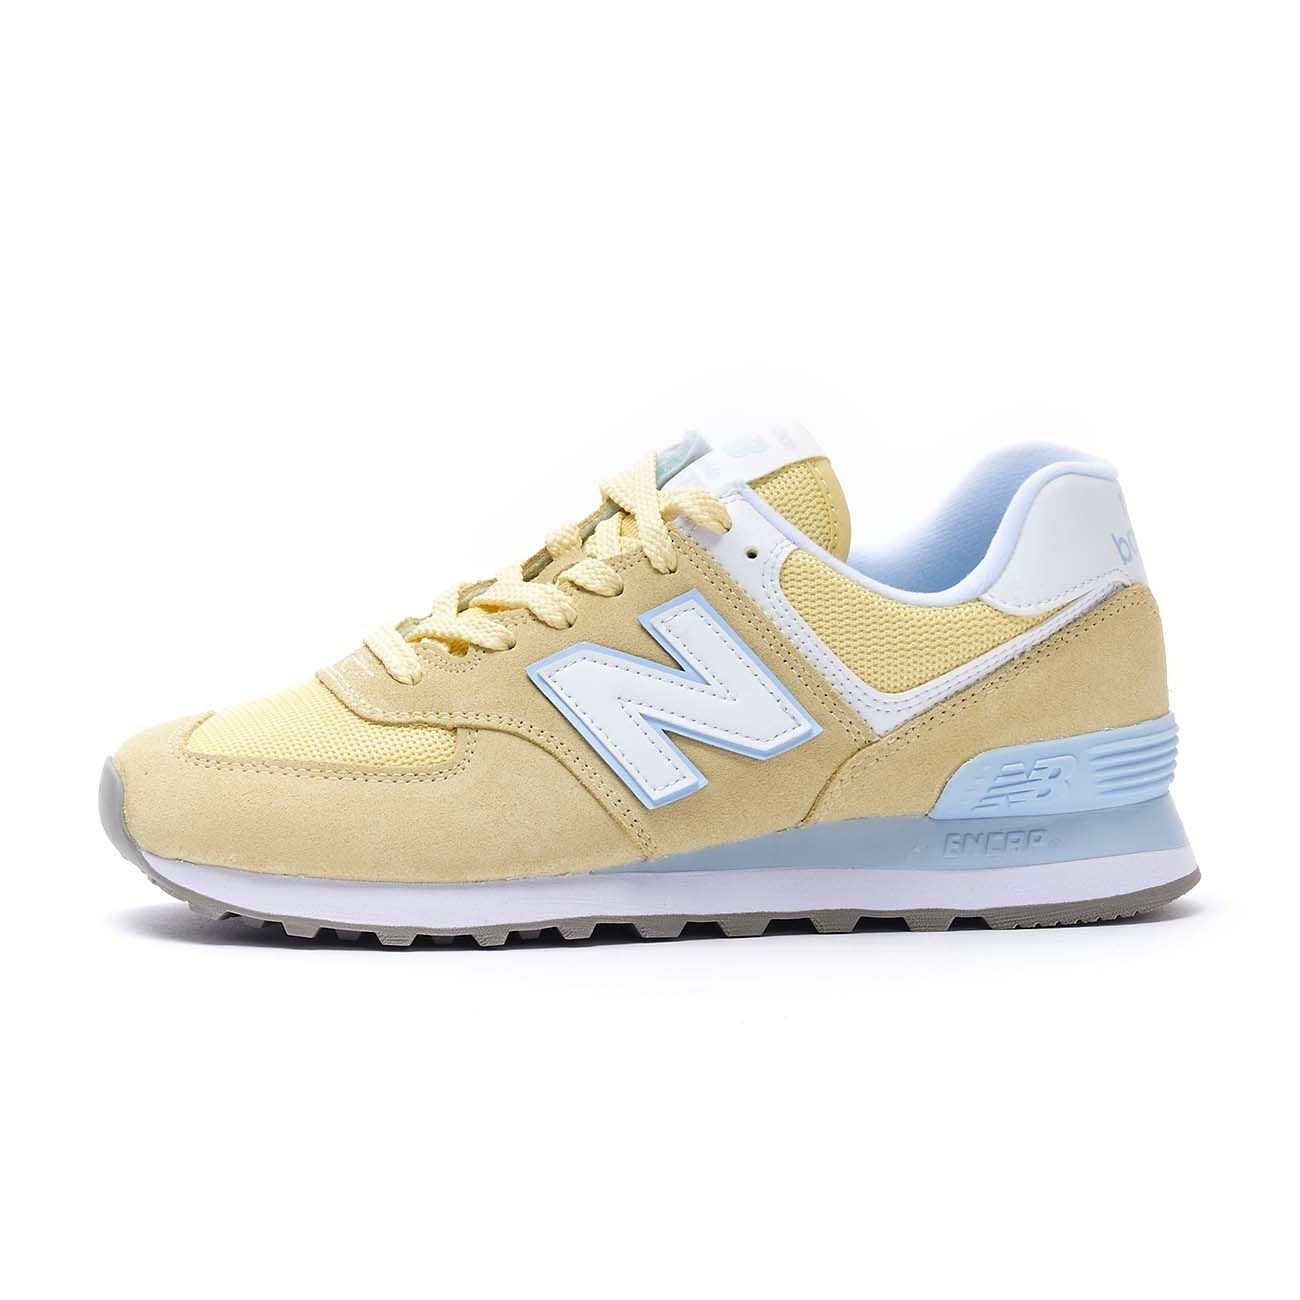 NEW BALANCE SNEAKERS 574 LIFESTYLE 